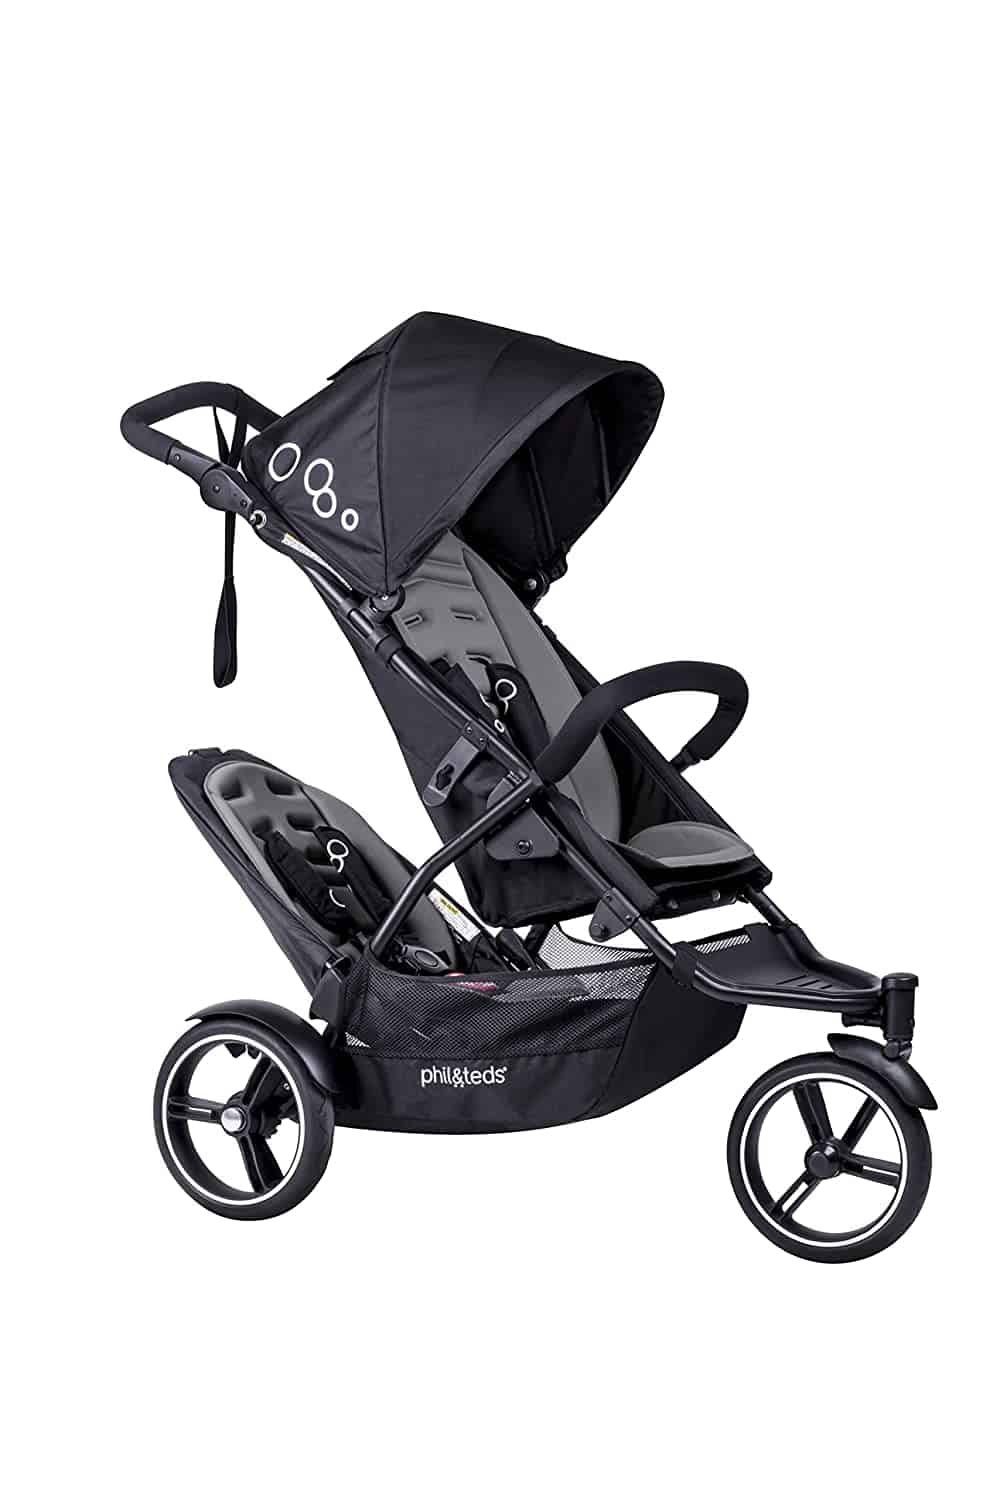 The 8 Best Double Jogging Strollers to Buy 2020 - LittleOneMag